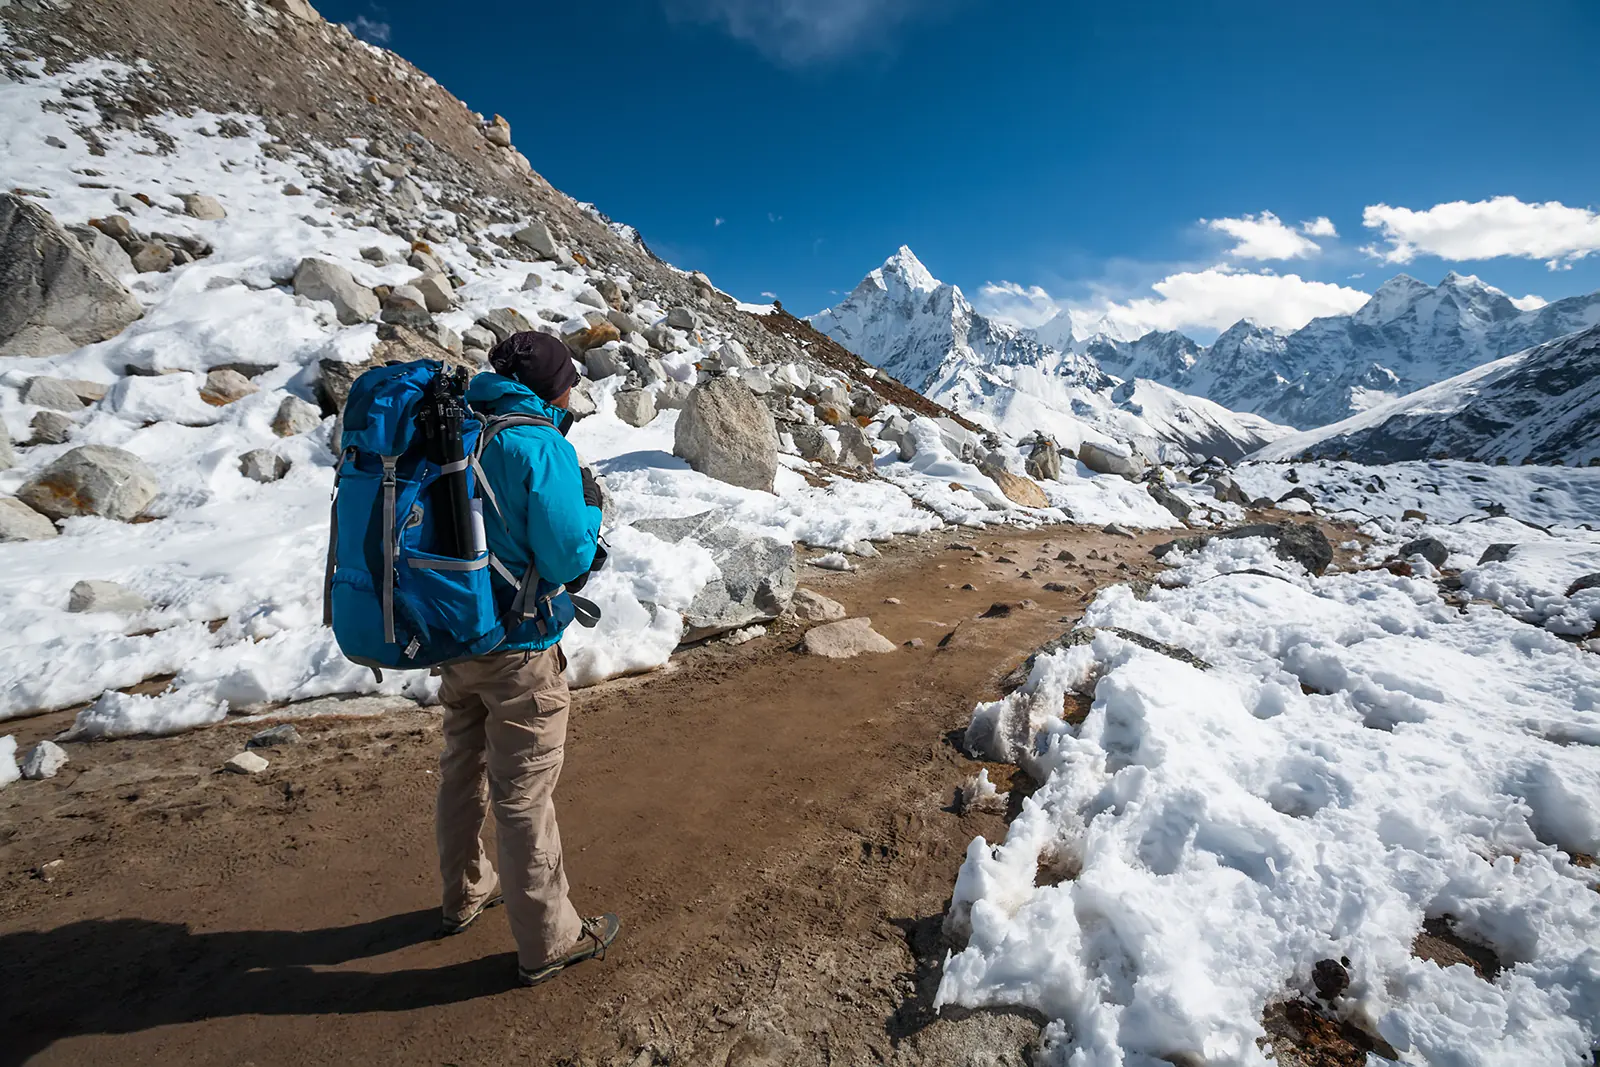 Trekkers on the iconic Everest Base Camp trail